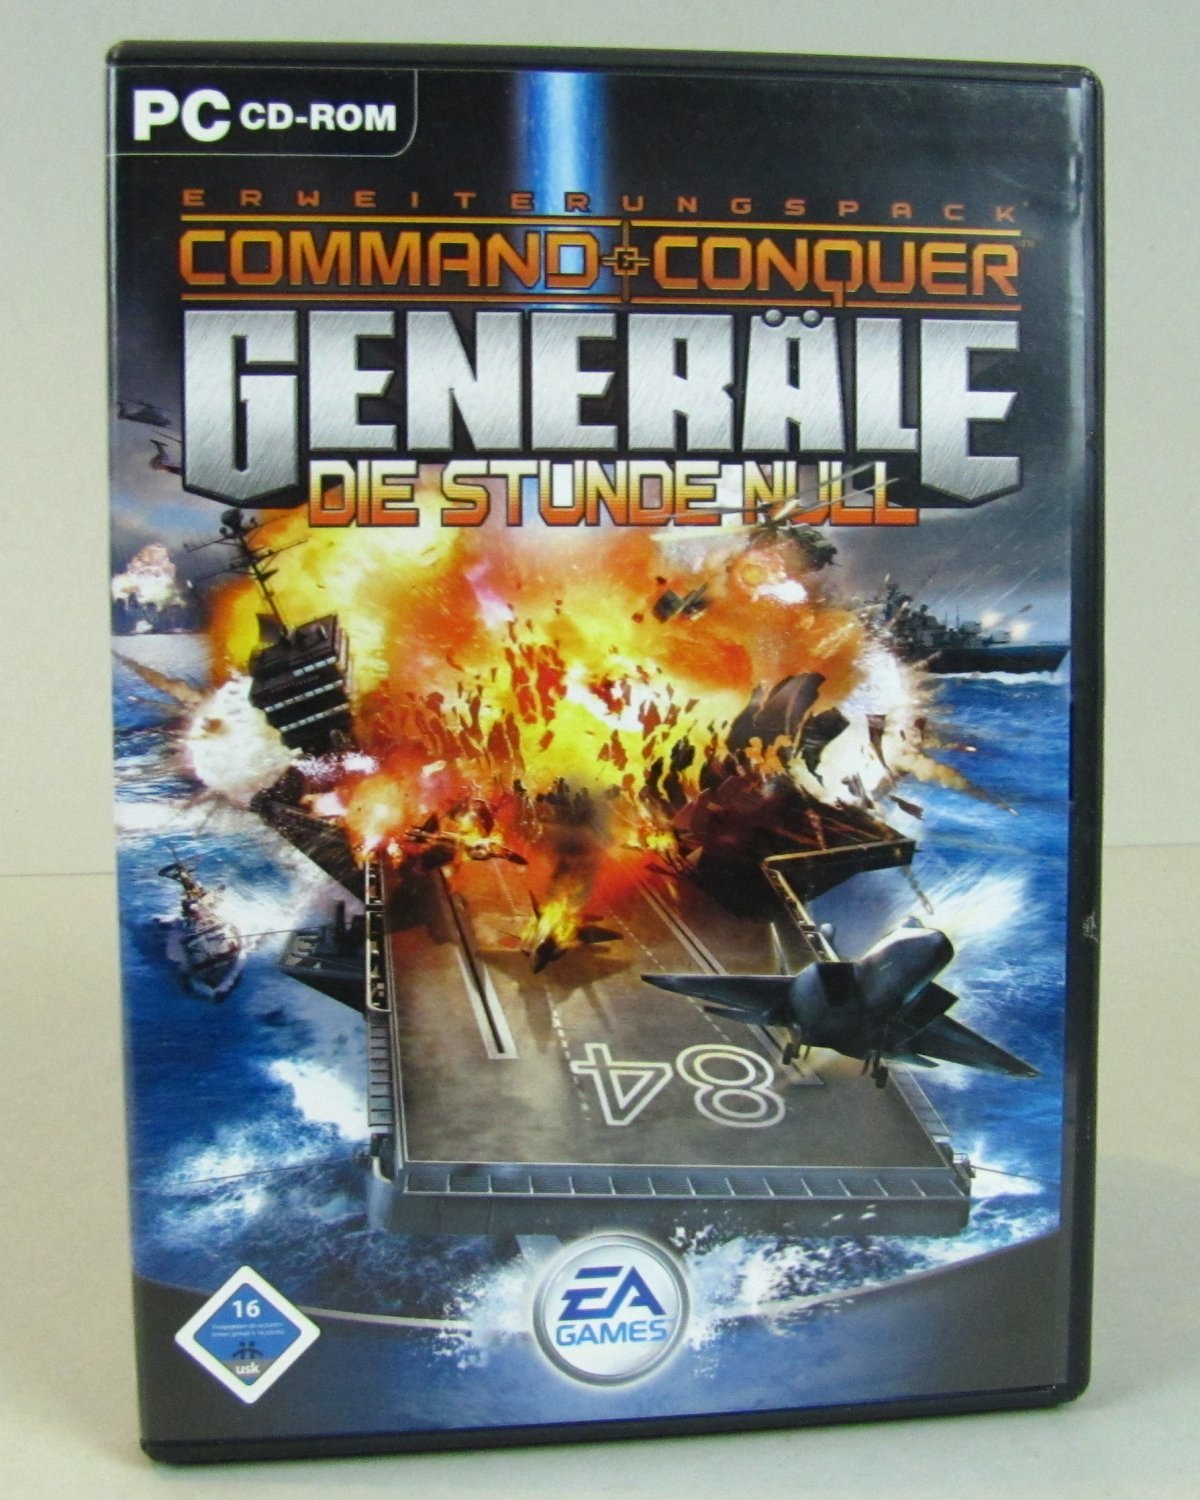 command and conquer stunde null